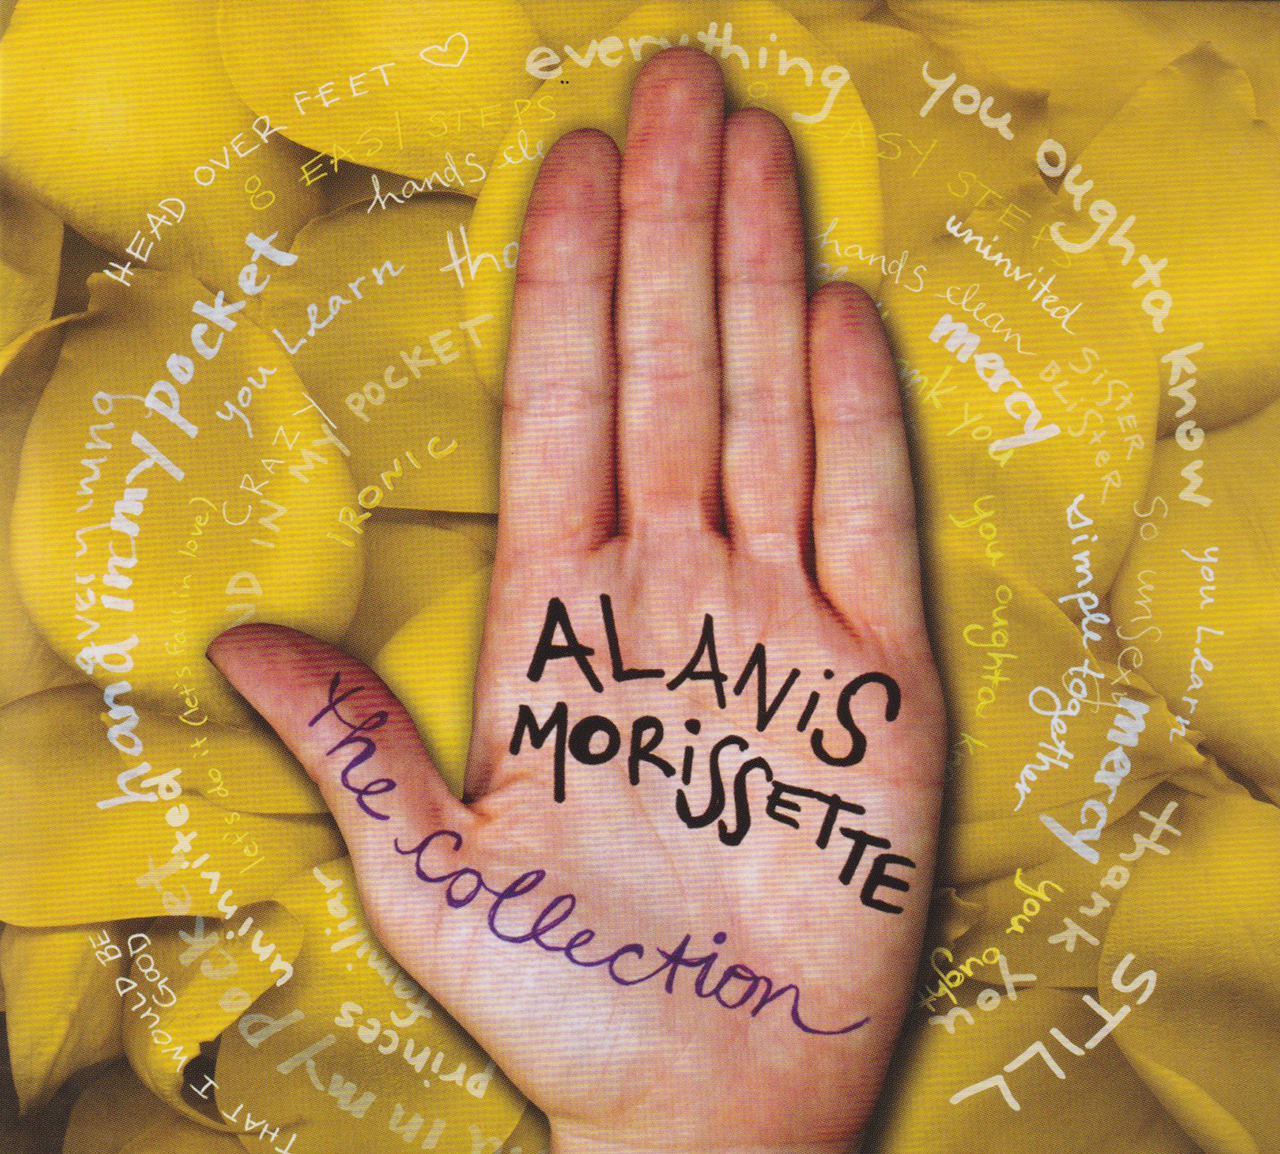 The Collection / Alanis Morissette